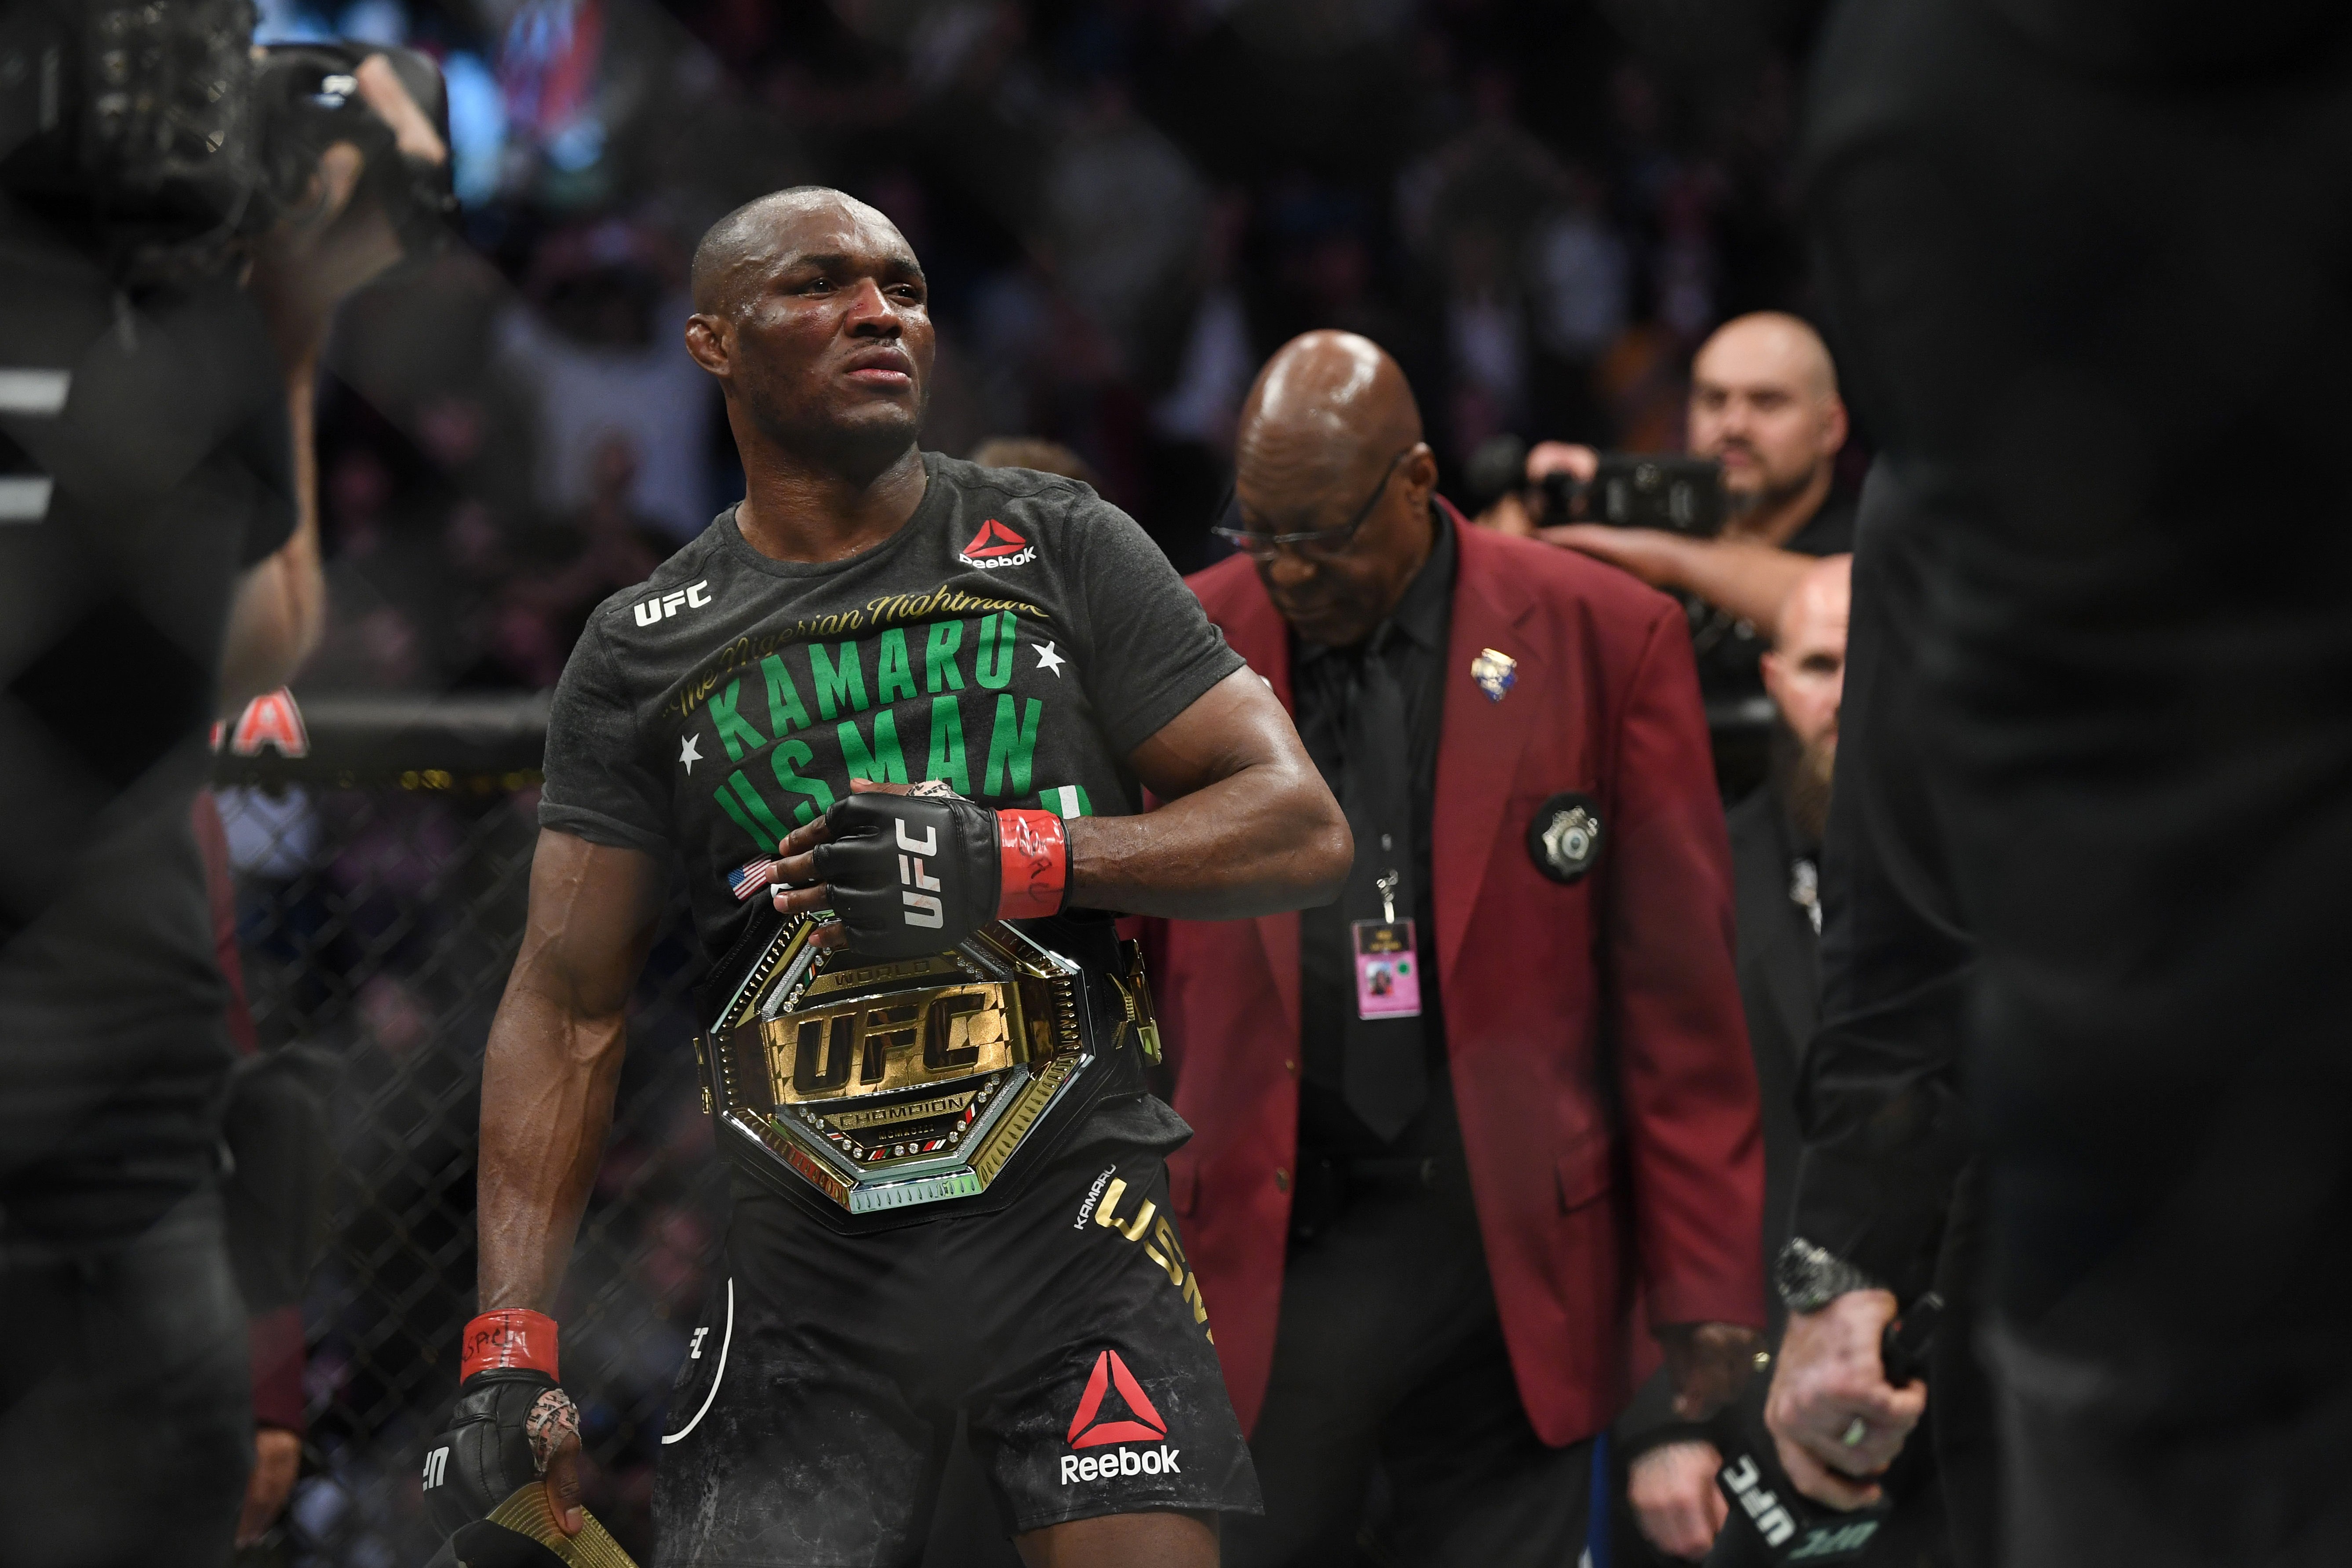 Kamaru Usman defends his welterweight title against Colby Covington at UFC 245 in 2019. Photo: USA Today